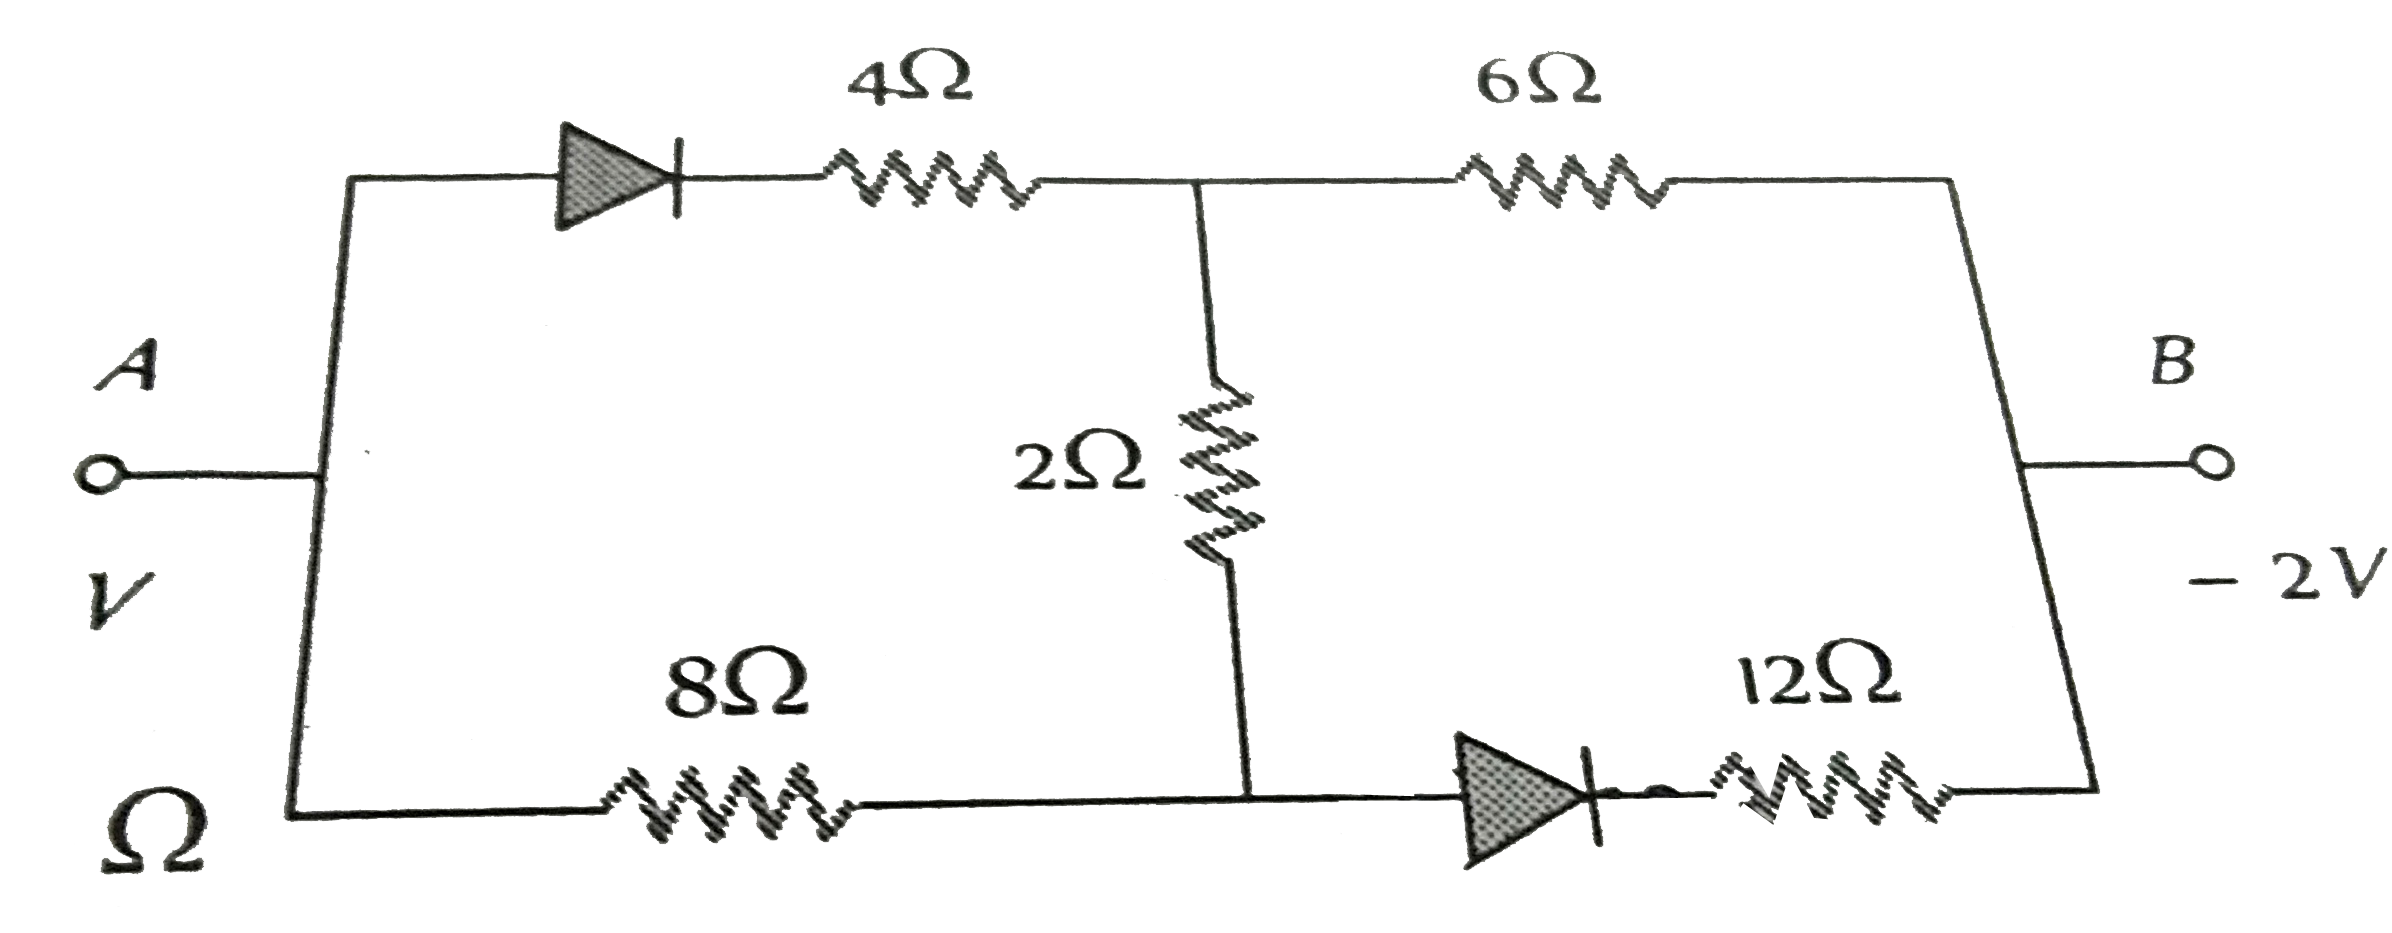 In the following circuit the equivalent resistance between A and B is